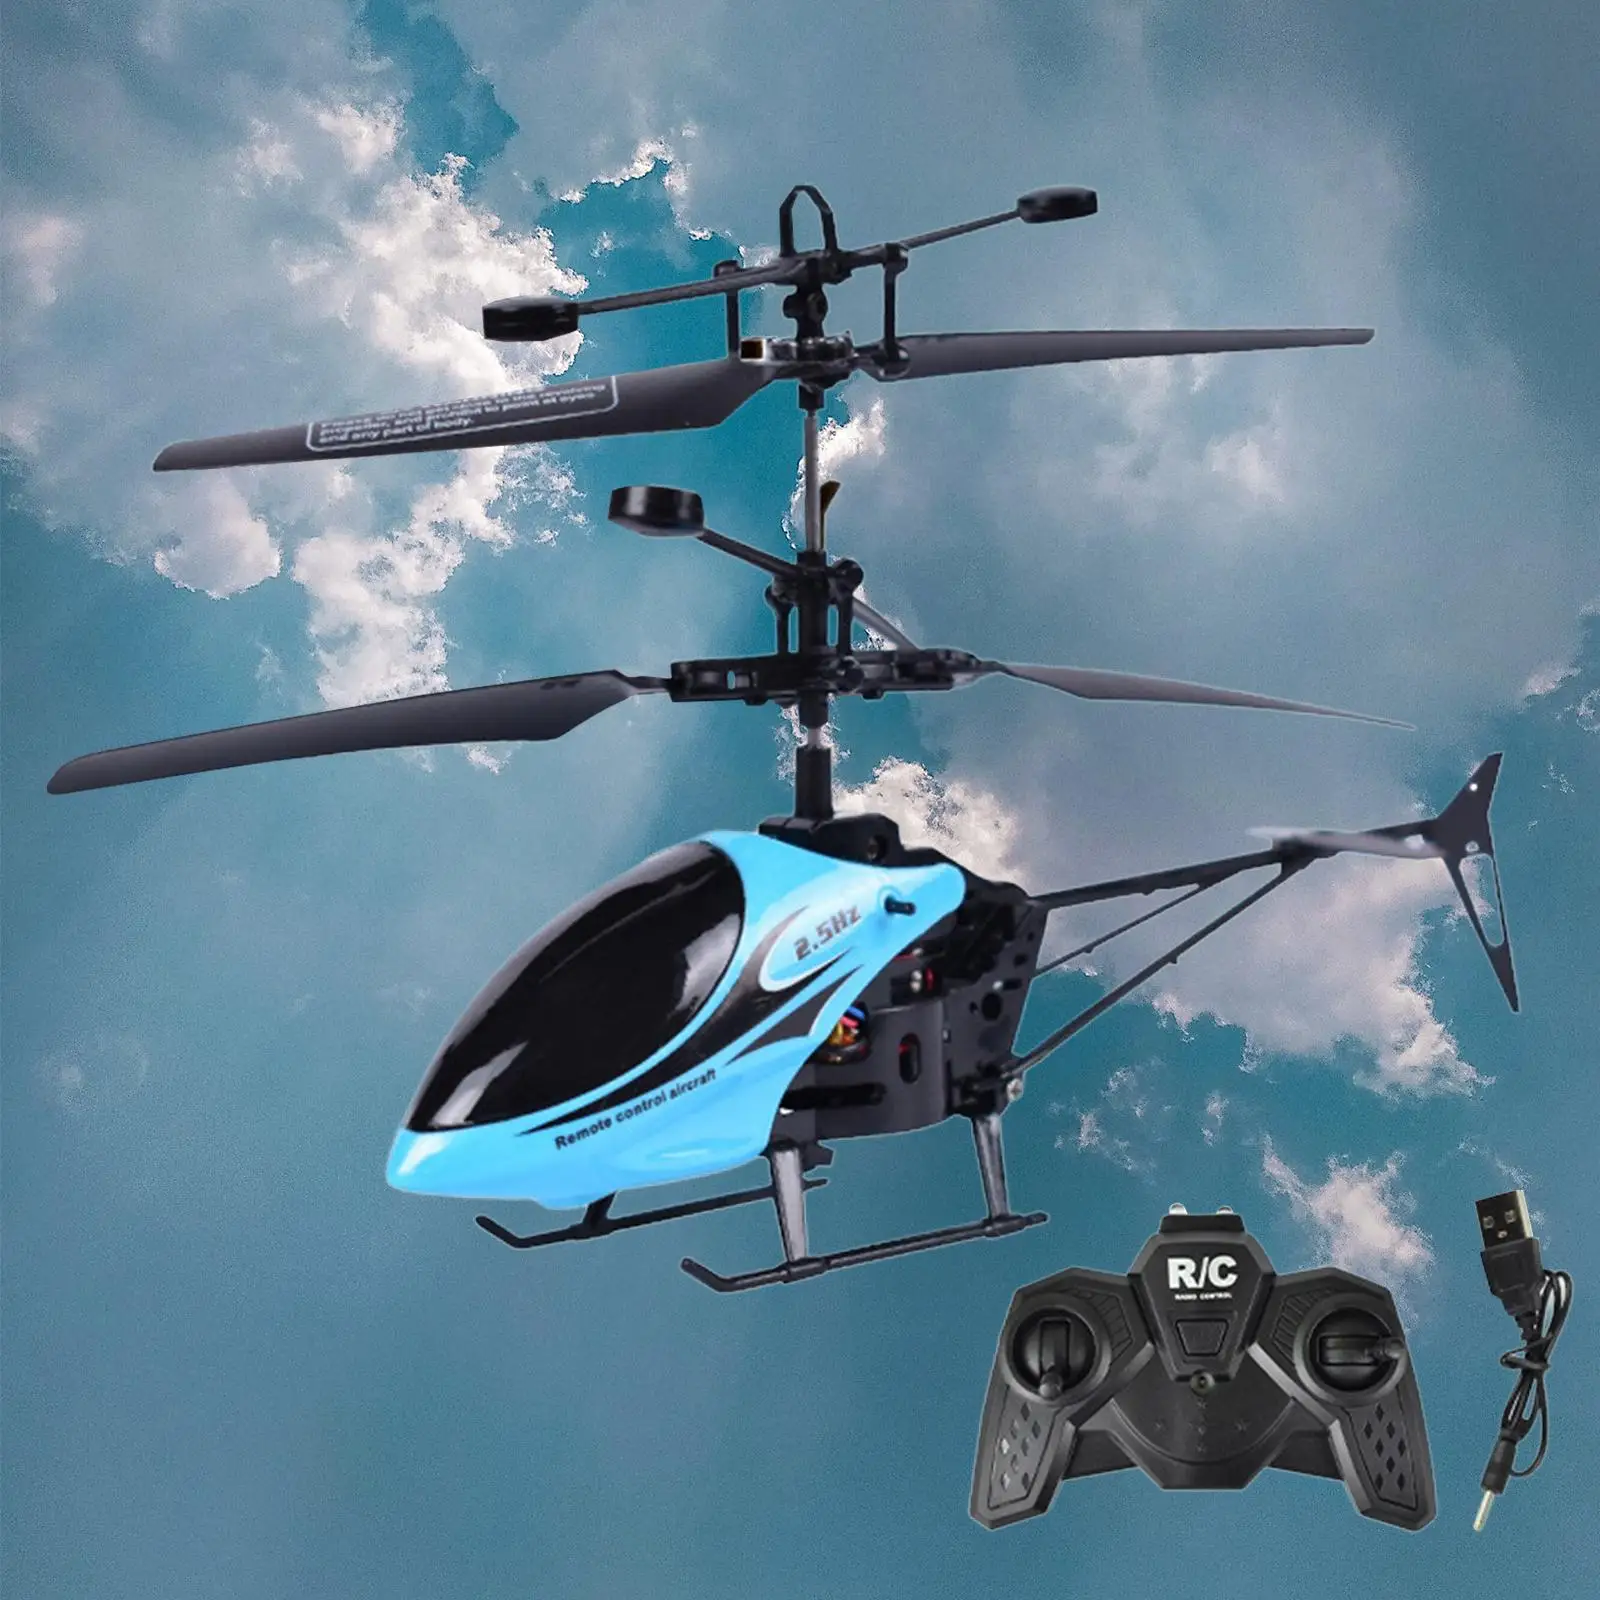 2 Channel Remote Control Helicopter Airplanes Aircraft Fighter with Light Plane RC Drone for Kids Beginners Children Adults Boys